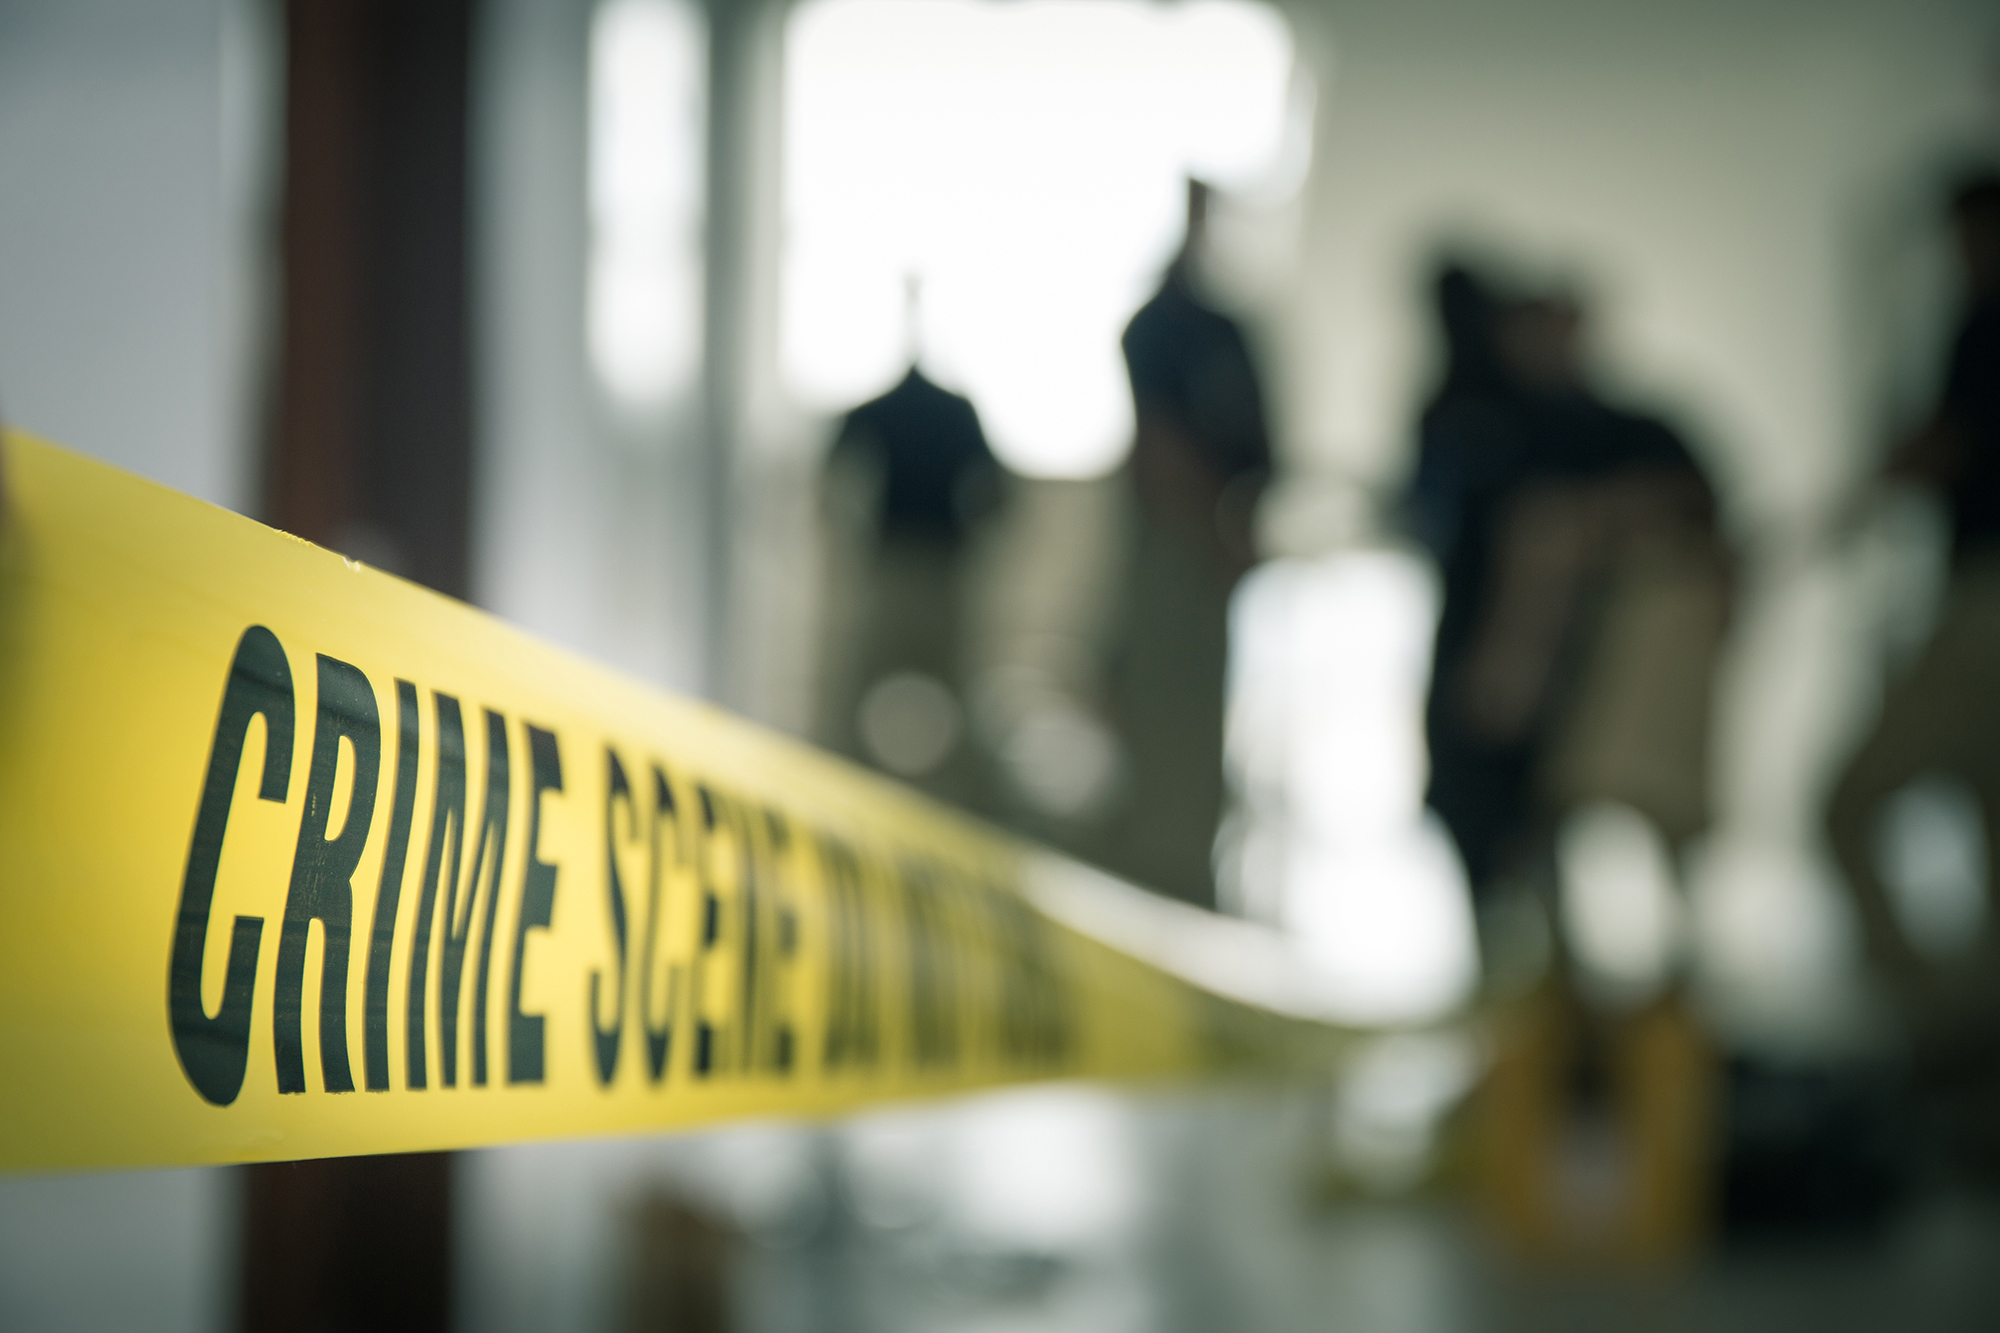 A couple found shot dead in their room